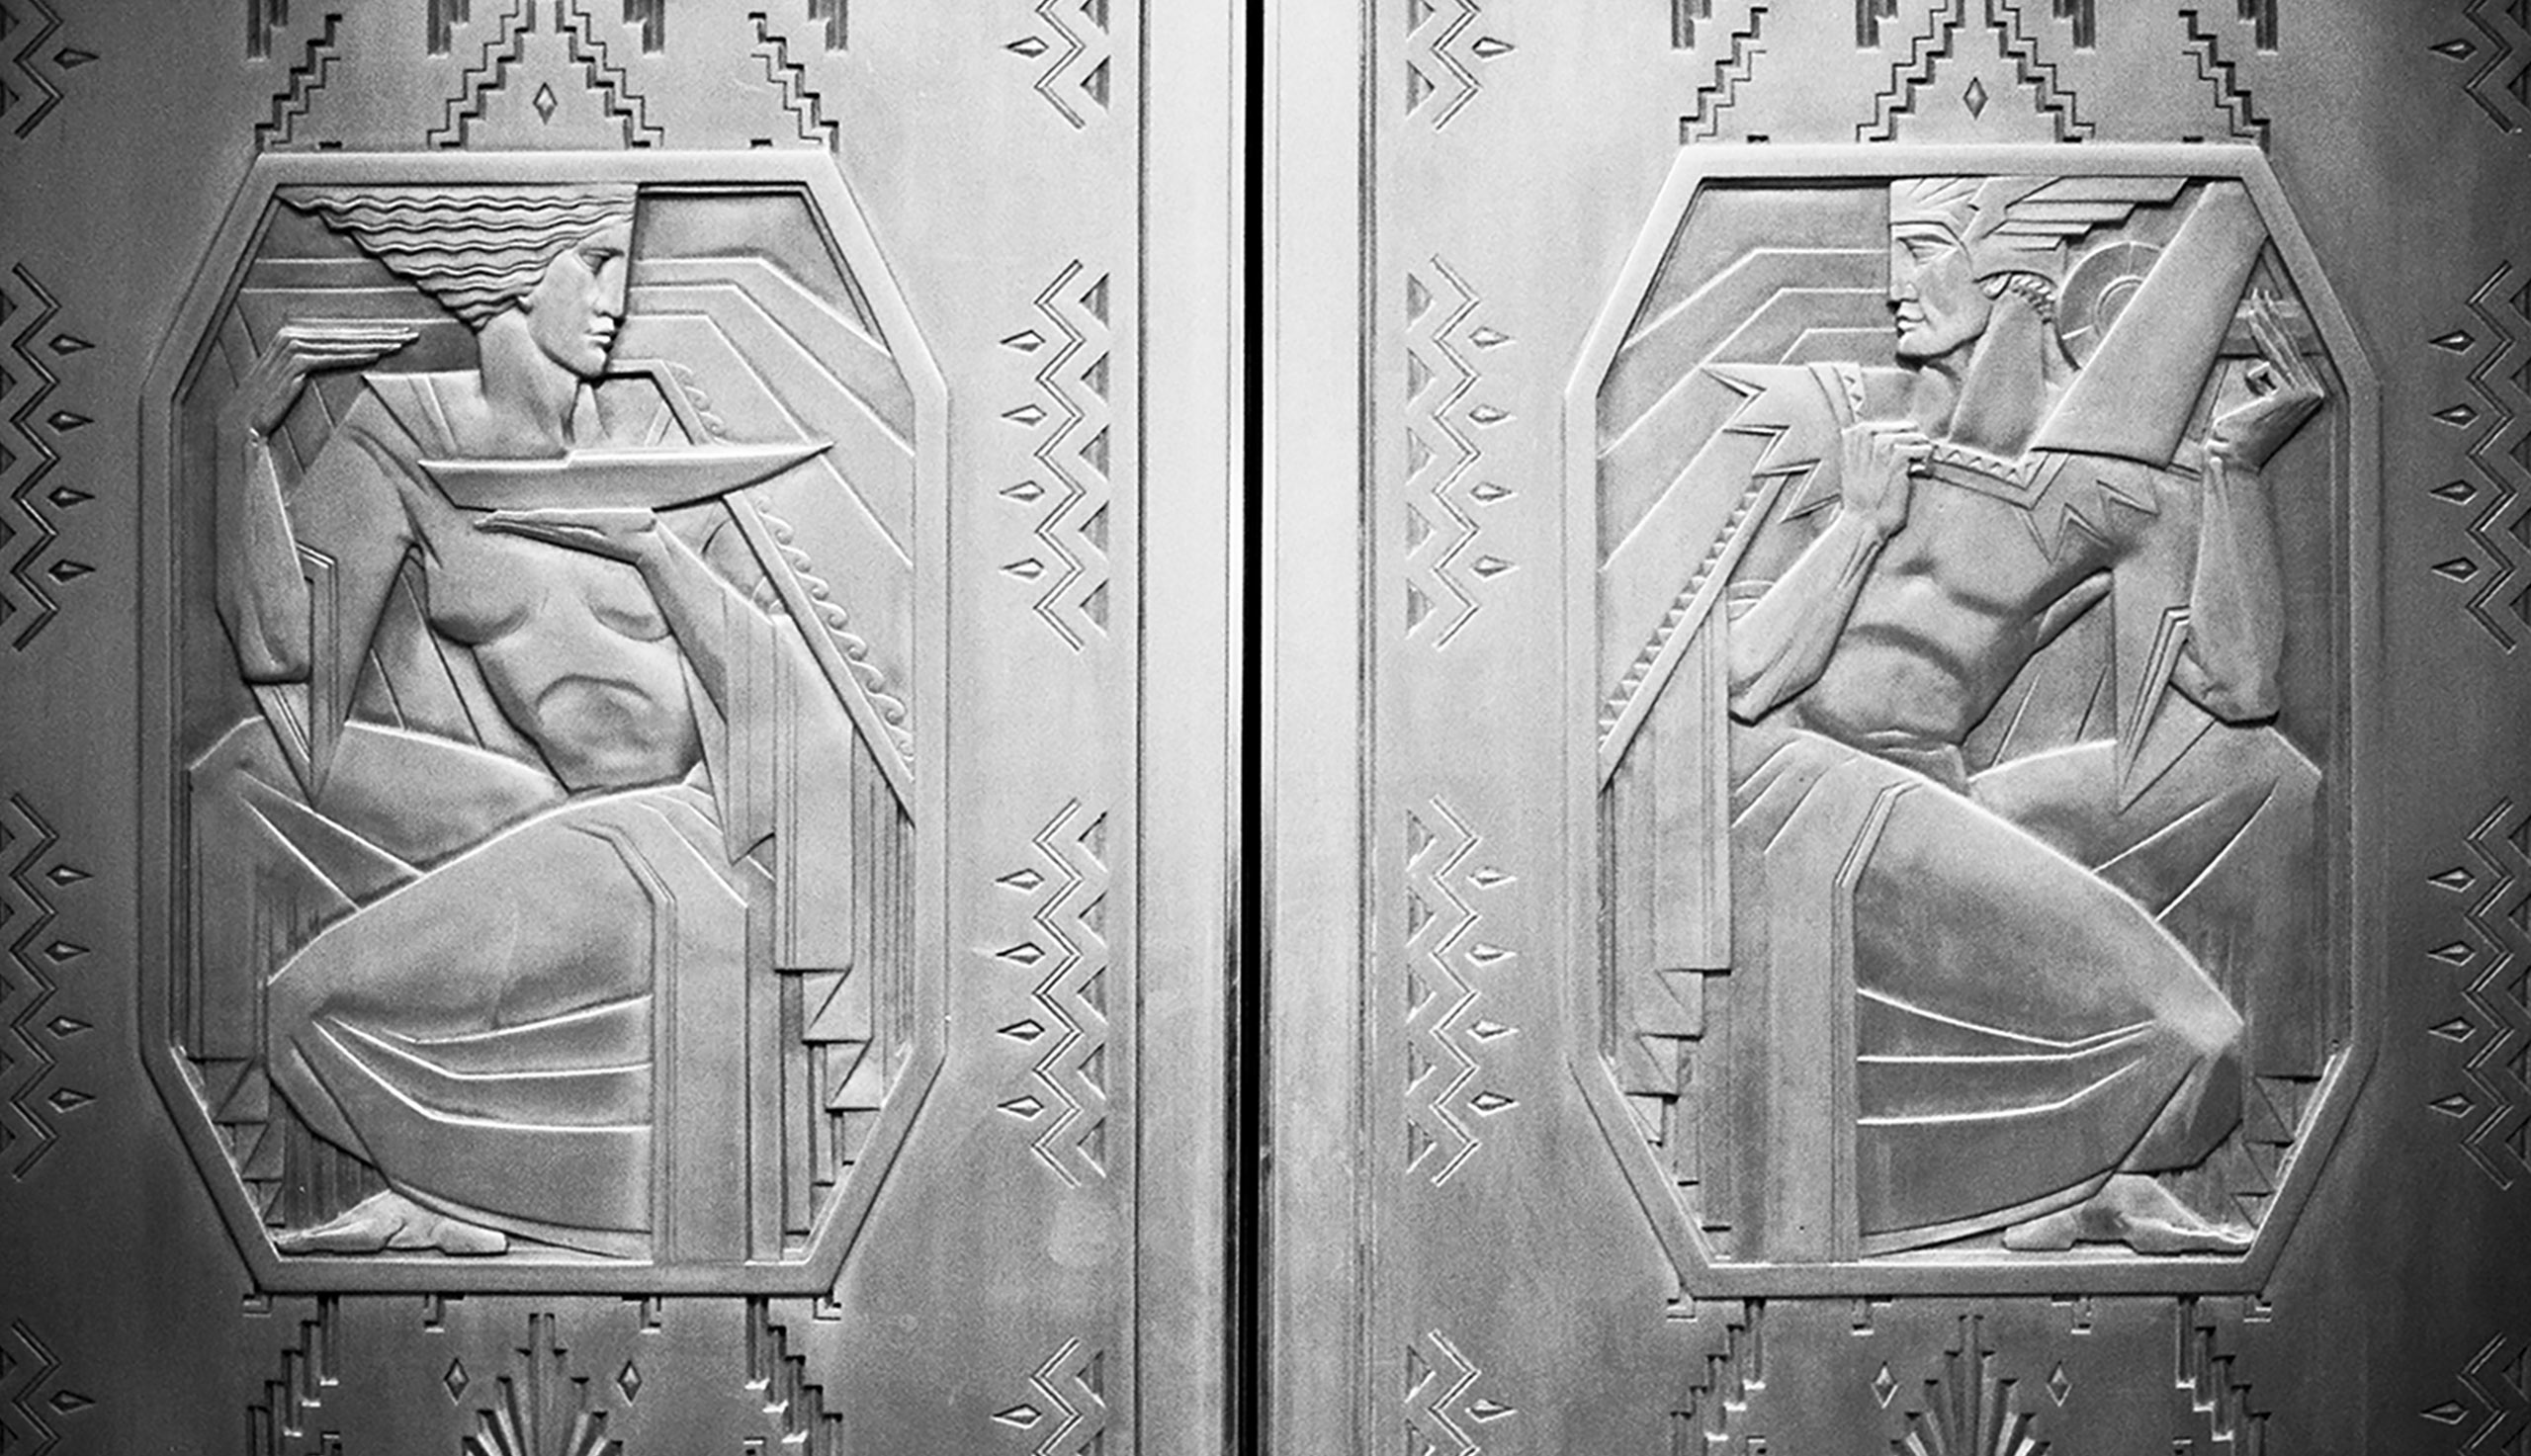 The elevator doors at 100 Barclay